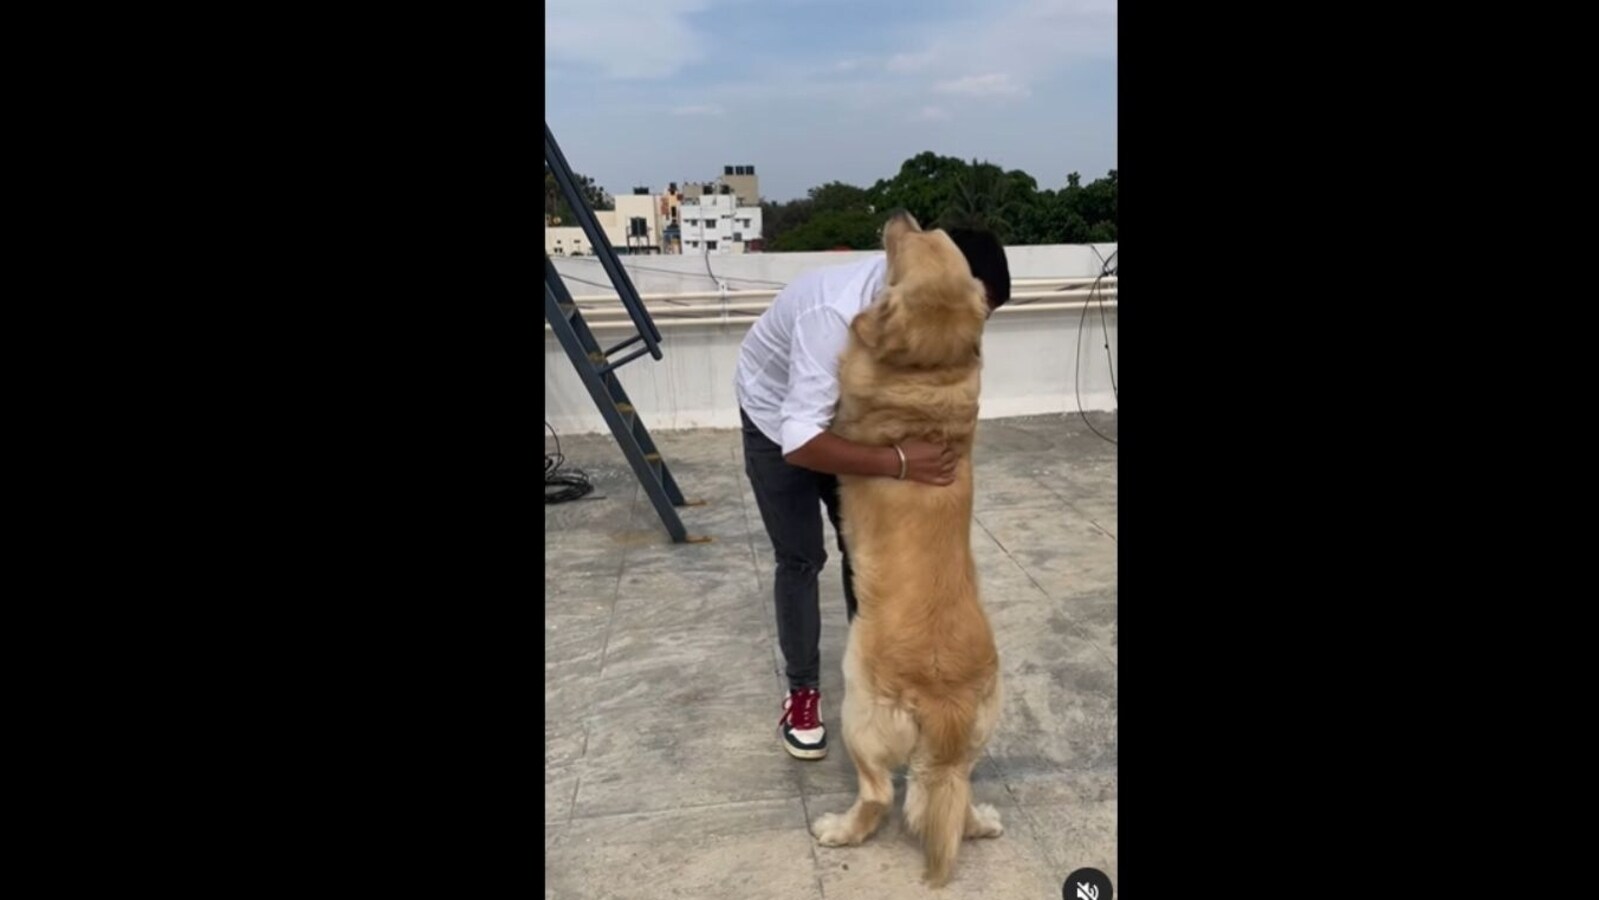 Dog meets its human after many days. Video is heartwarming to watch |  Trending - Hindustan Times